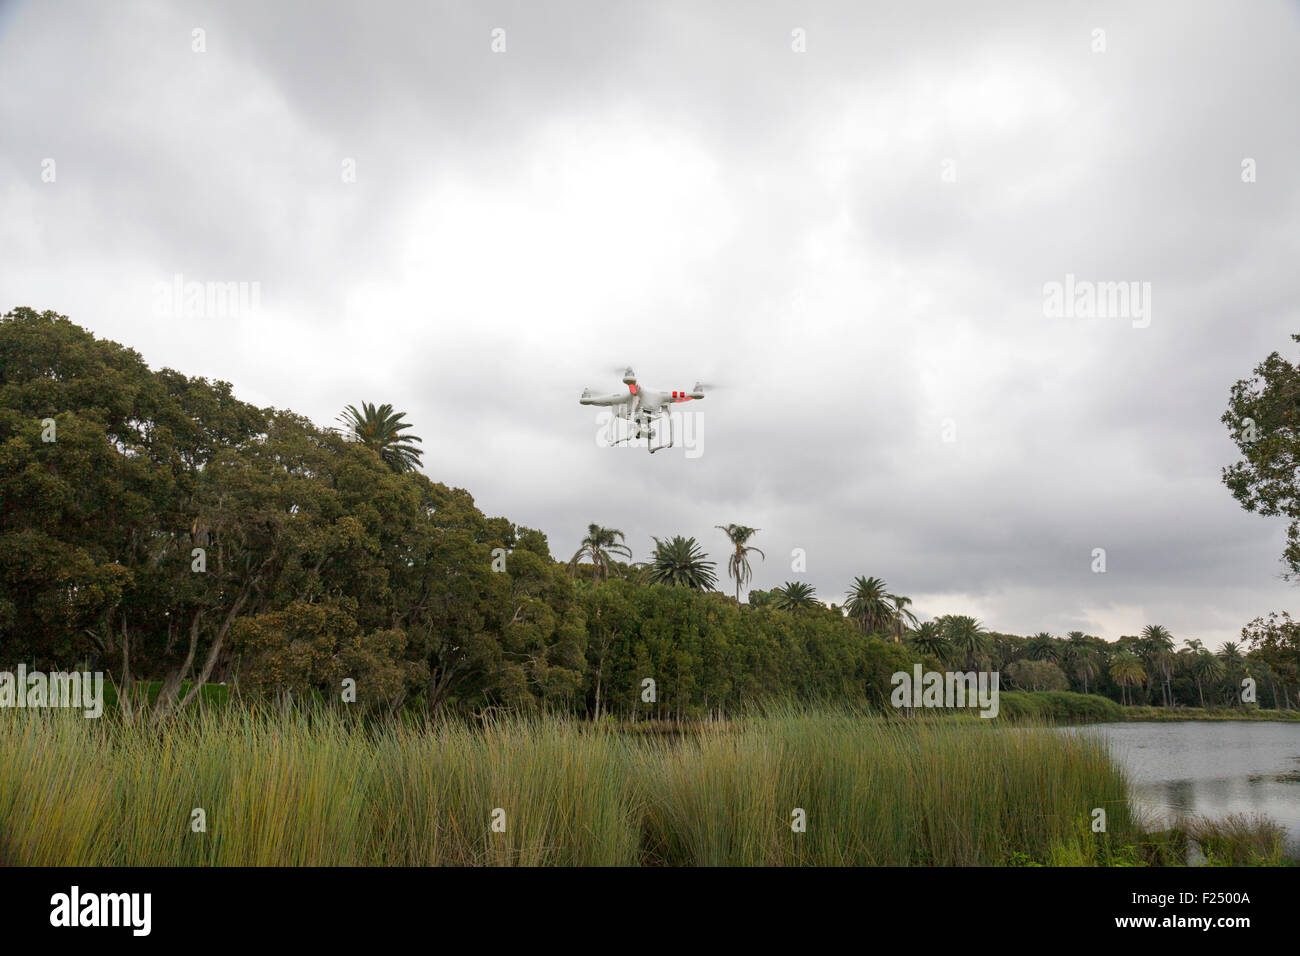 A flying drone with a gimbal and camera attached. Stock Photo